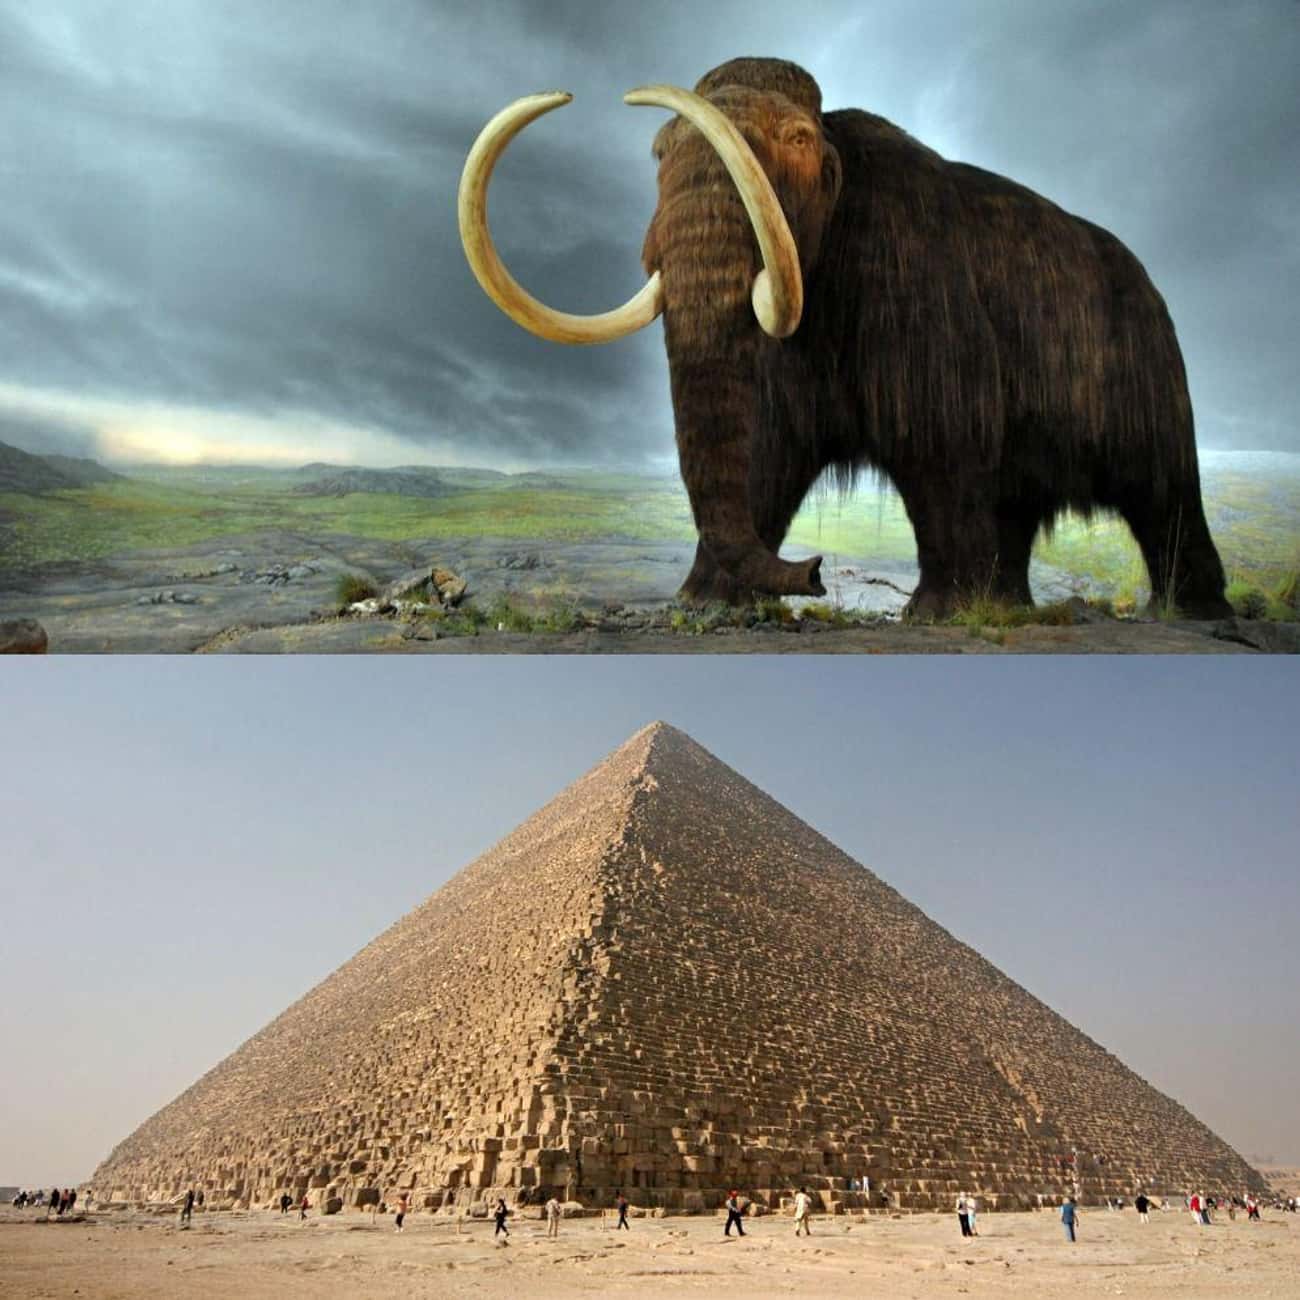 Woolly Mammoths Were Still Alive While Egyptians Were Building The Pyramids (2660 BCE)